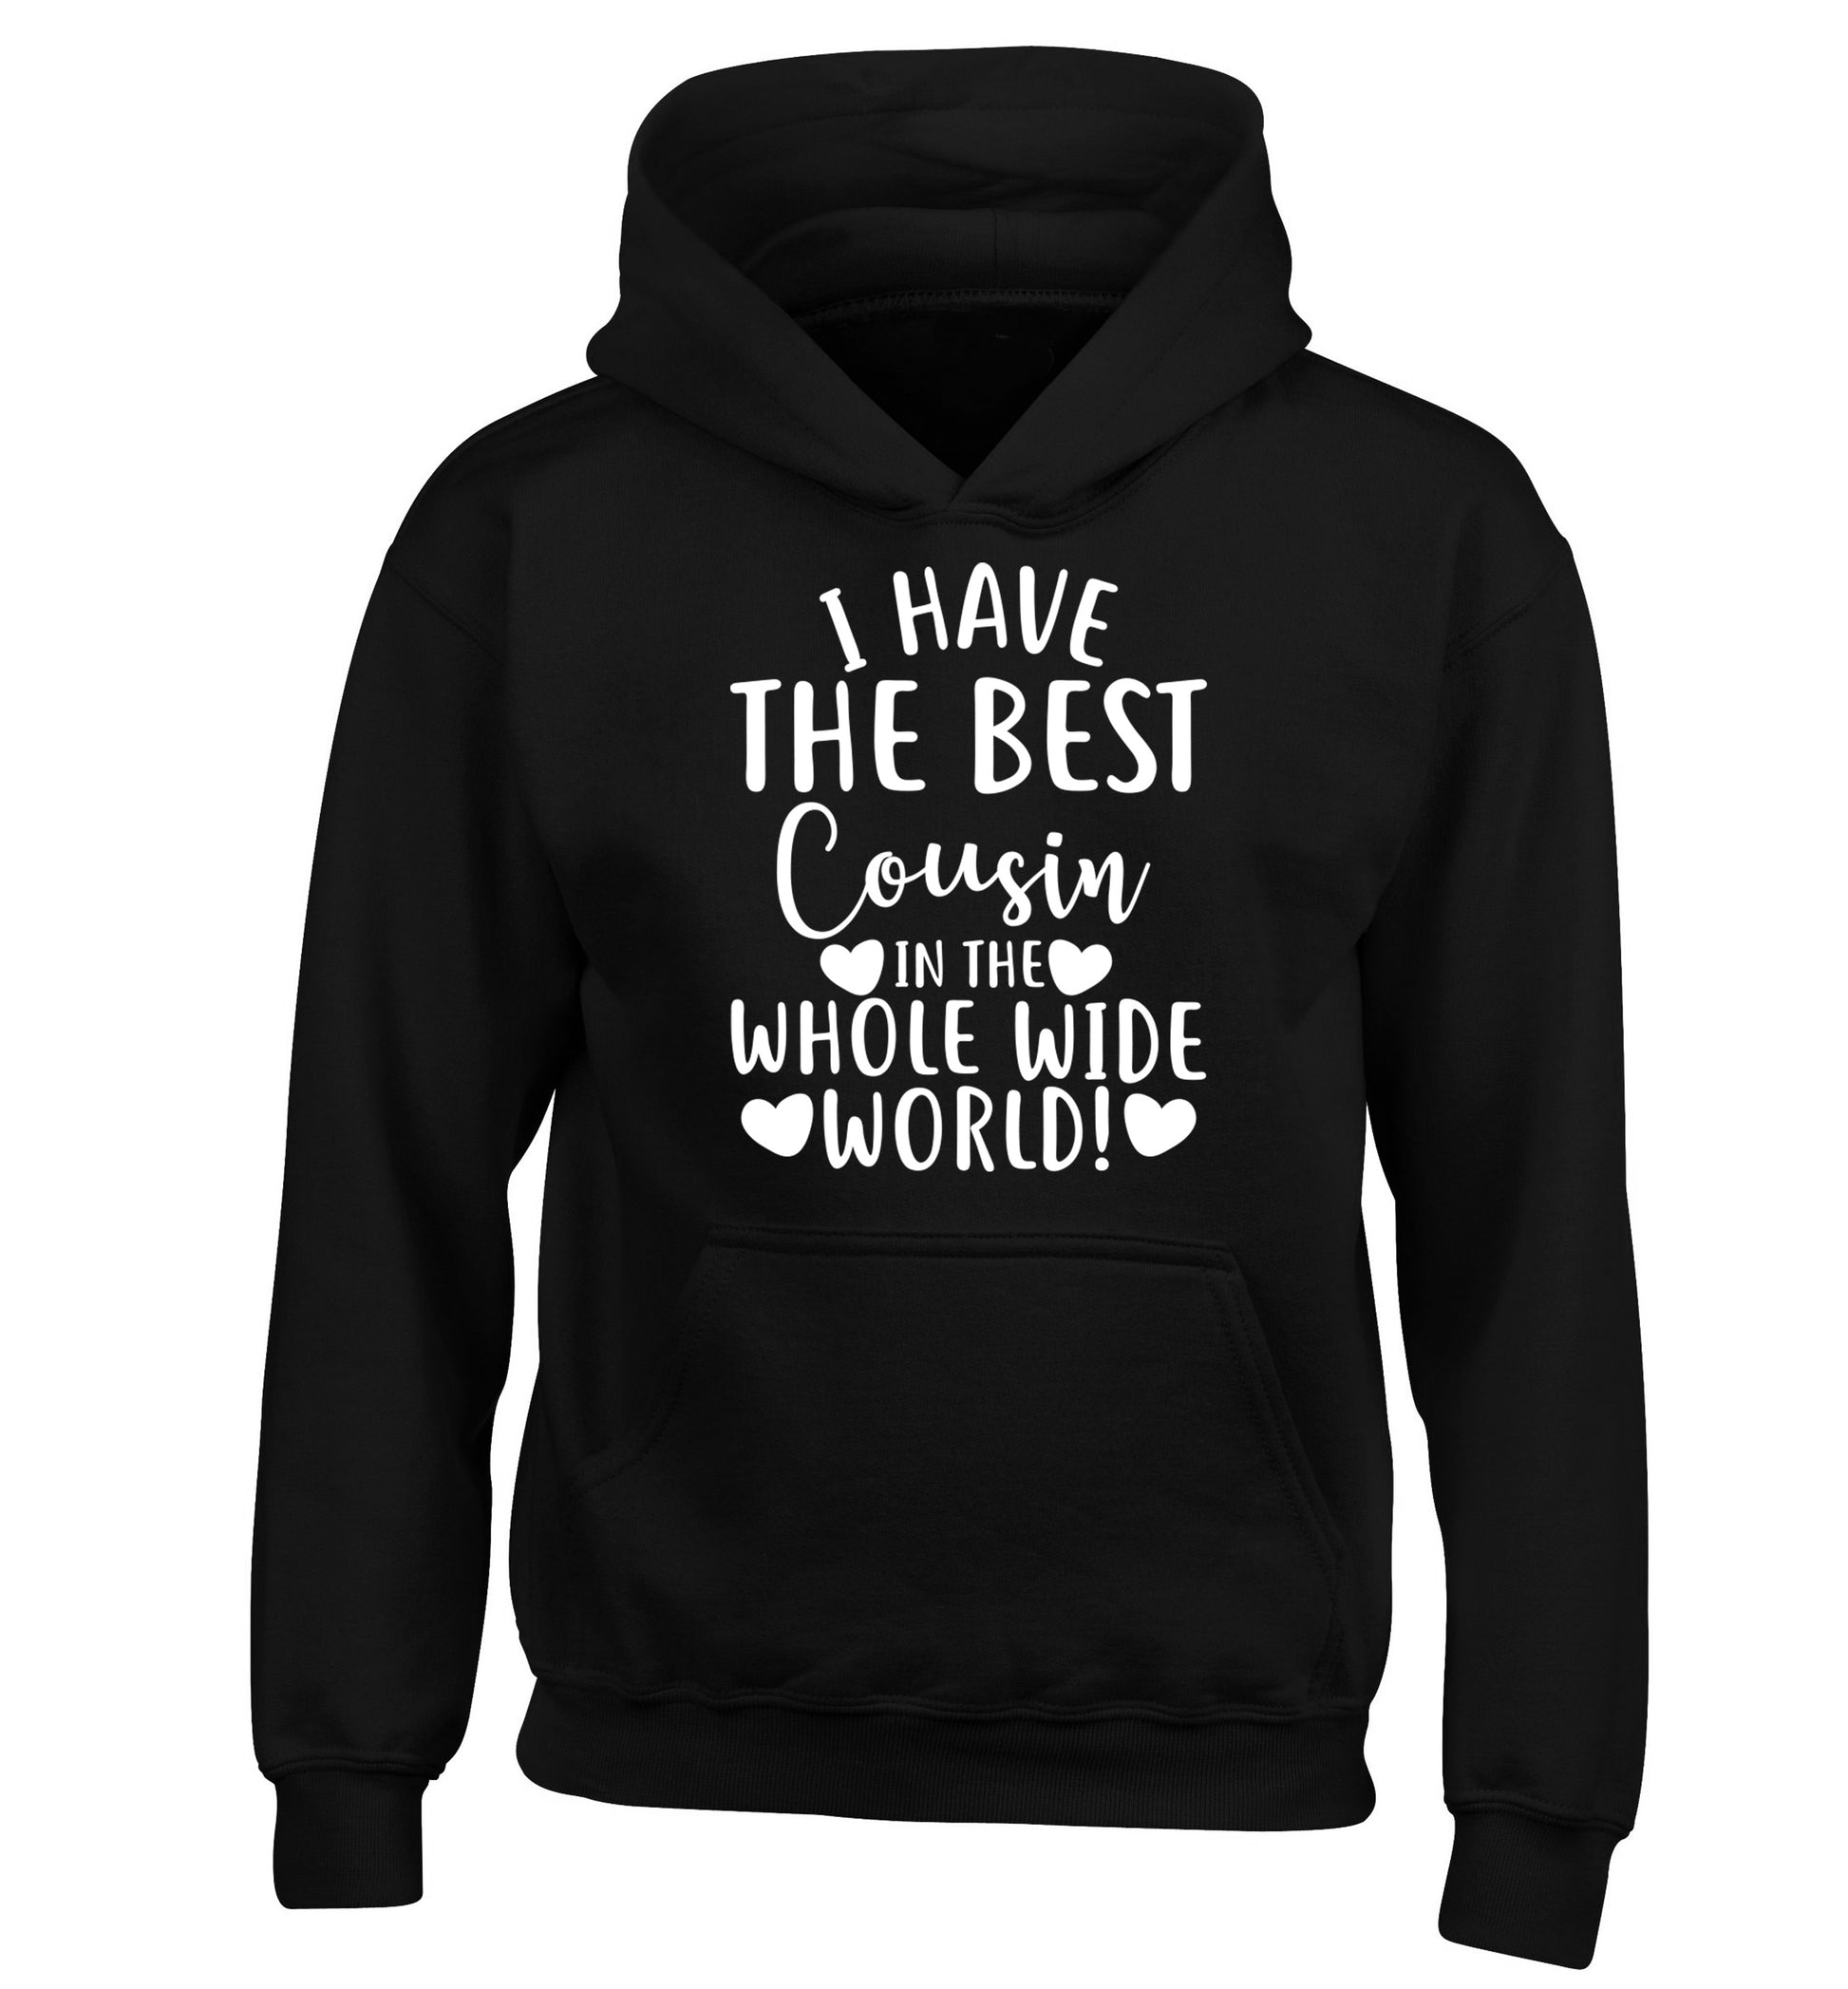 I have the best cousin in the whole wide world! children's black hoodie 12-13 Years